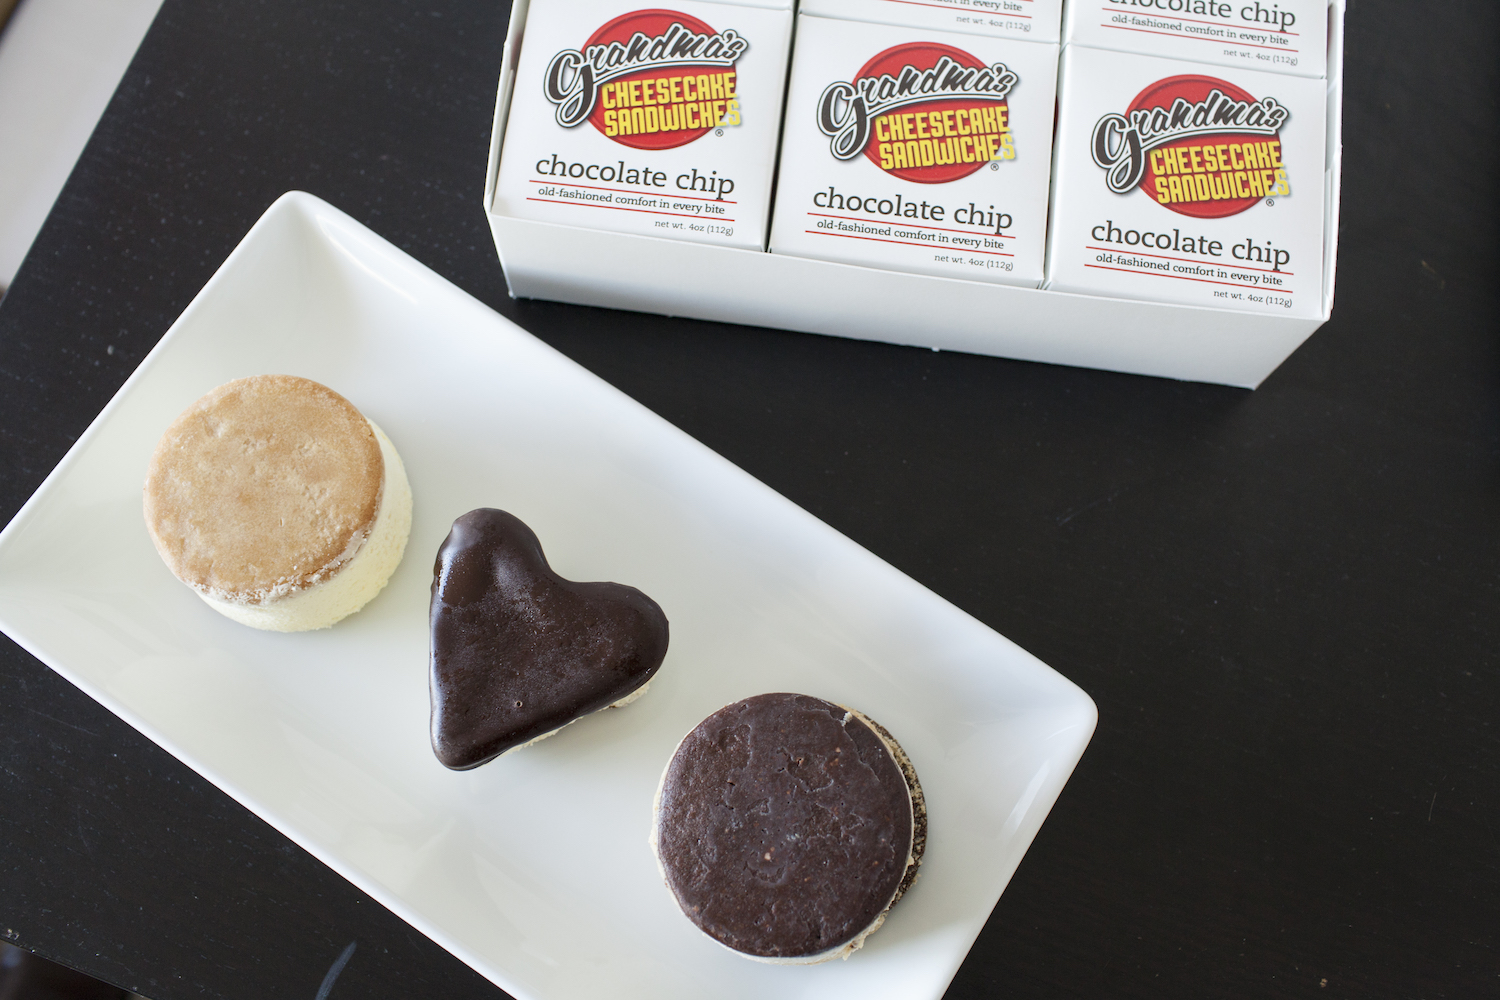 Plain, heart-shaped chocolate dipped and milk chocolate cheesecakes from Grandma’s Cheesecake Sandwiches.